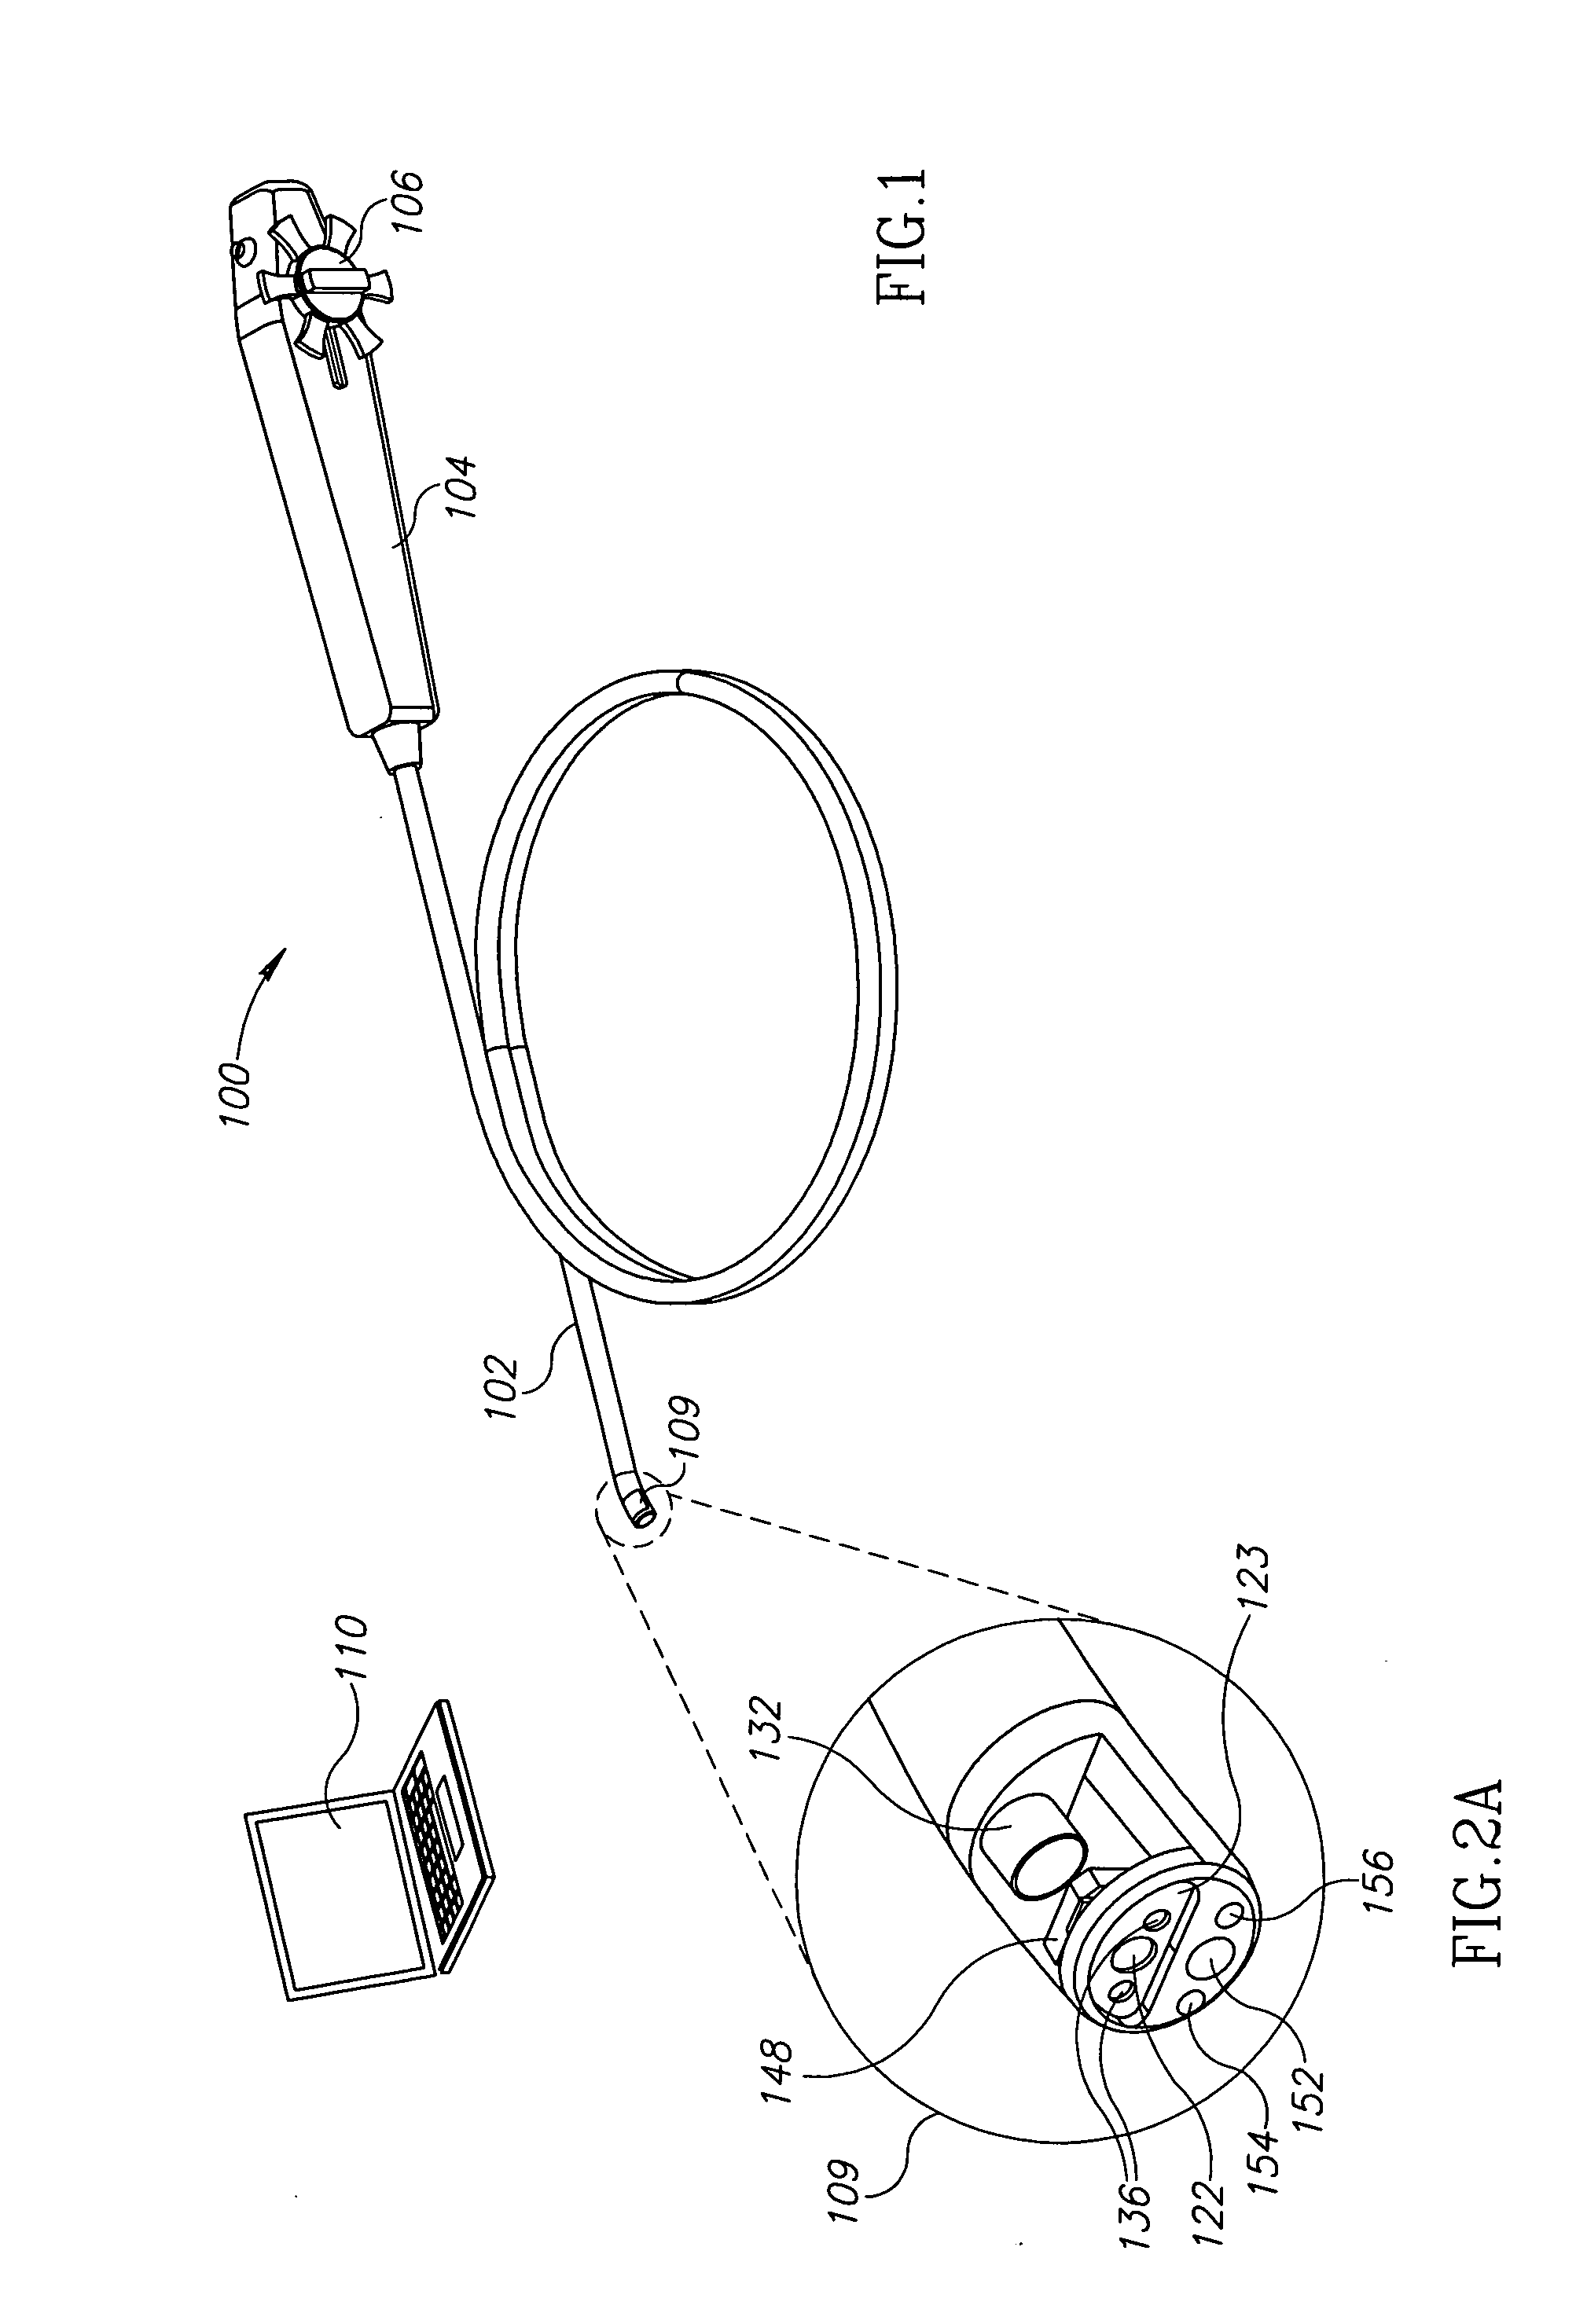 Endoscope With Imaging Capsule